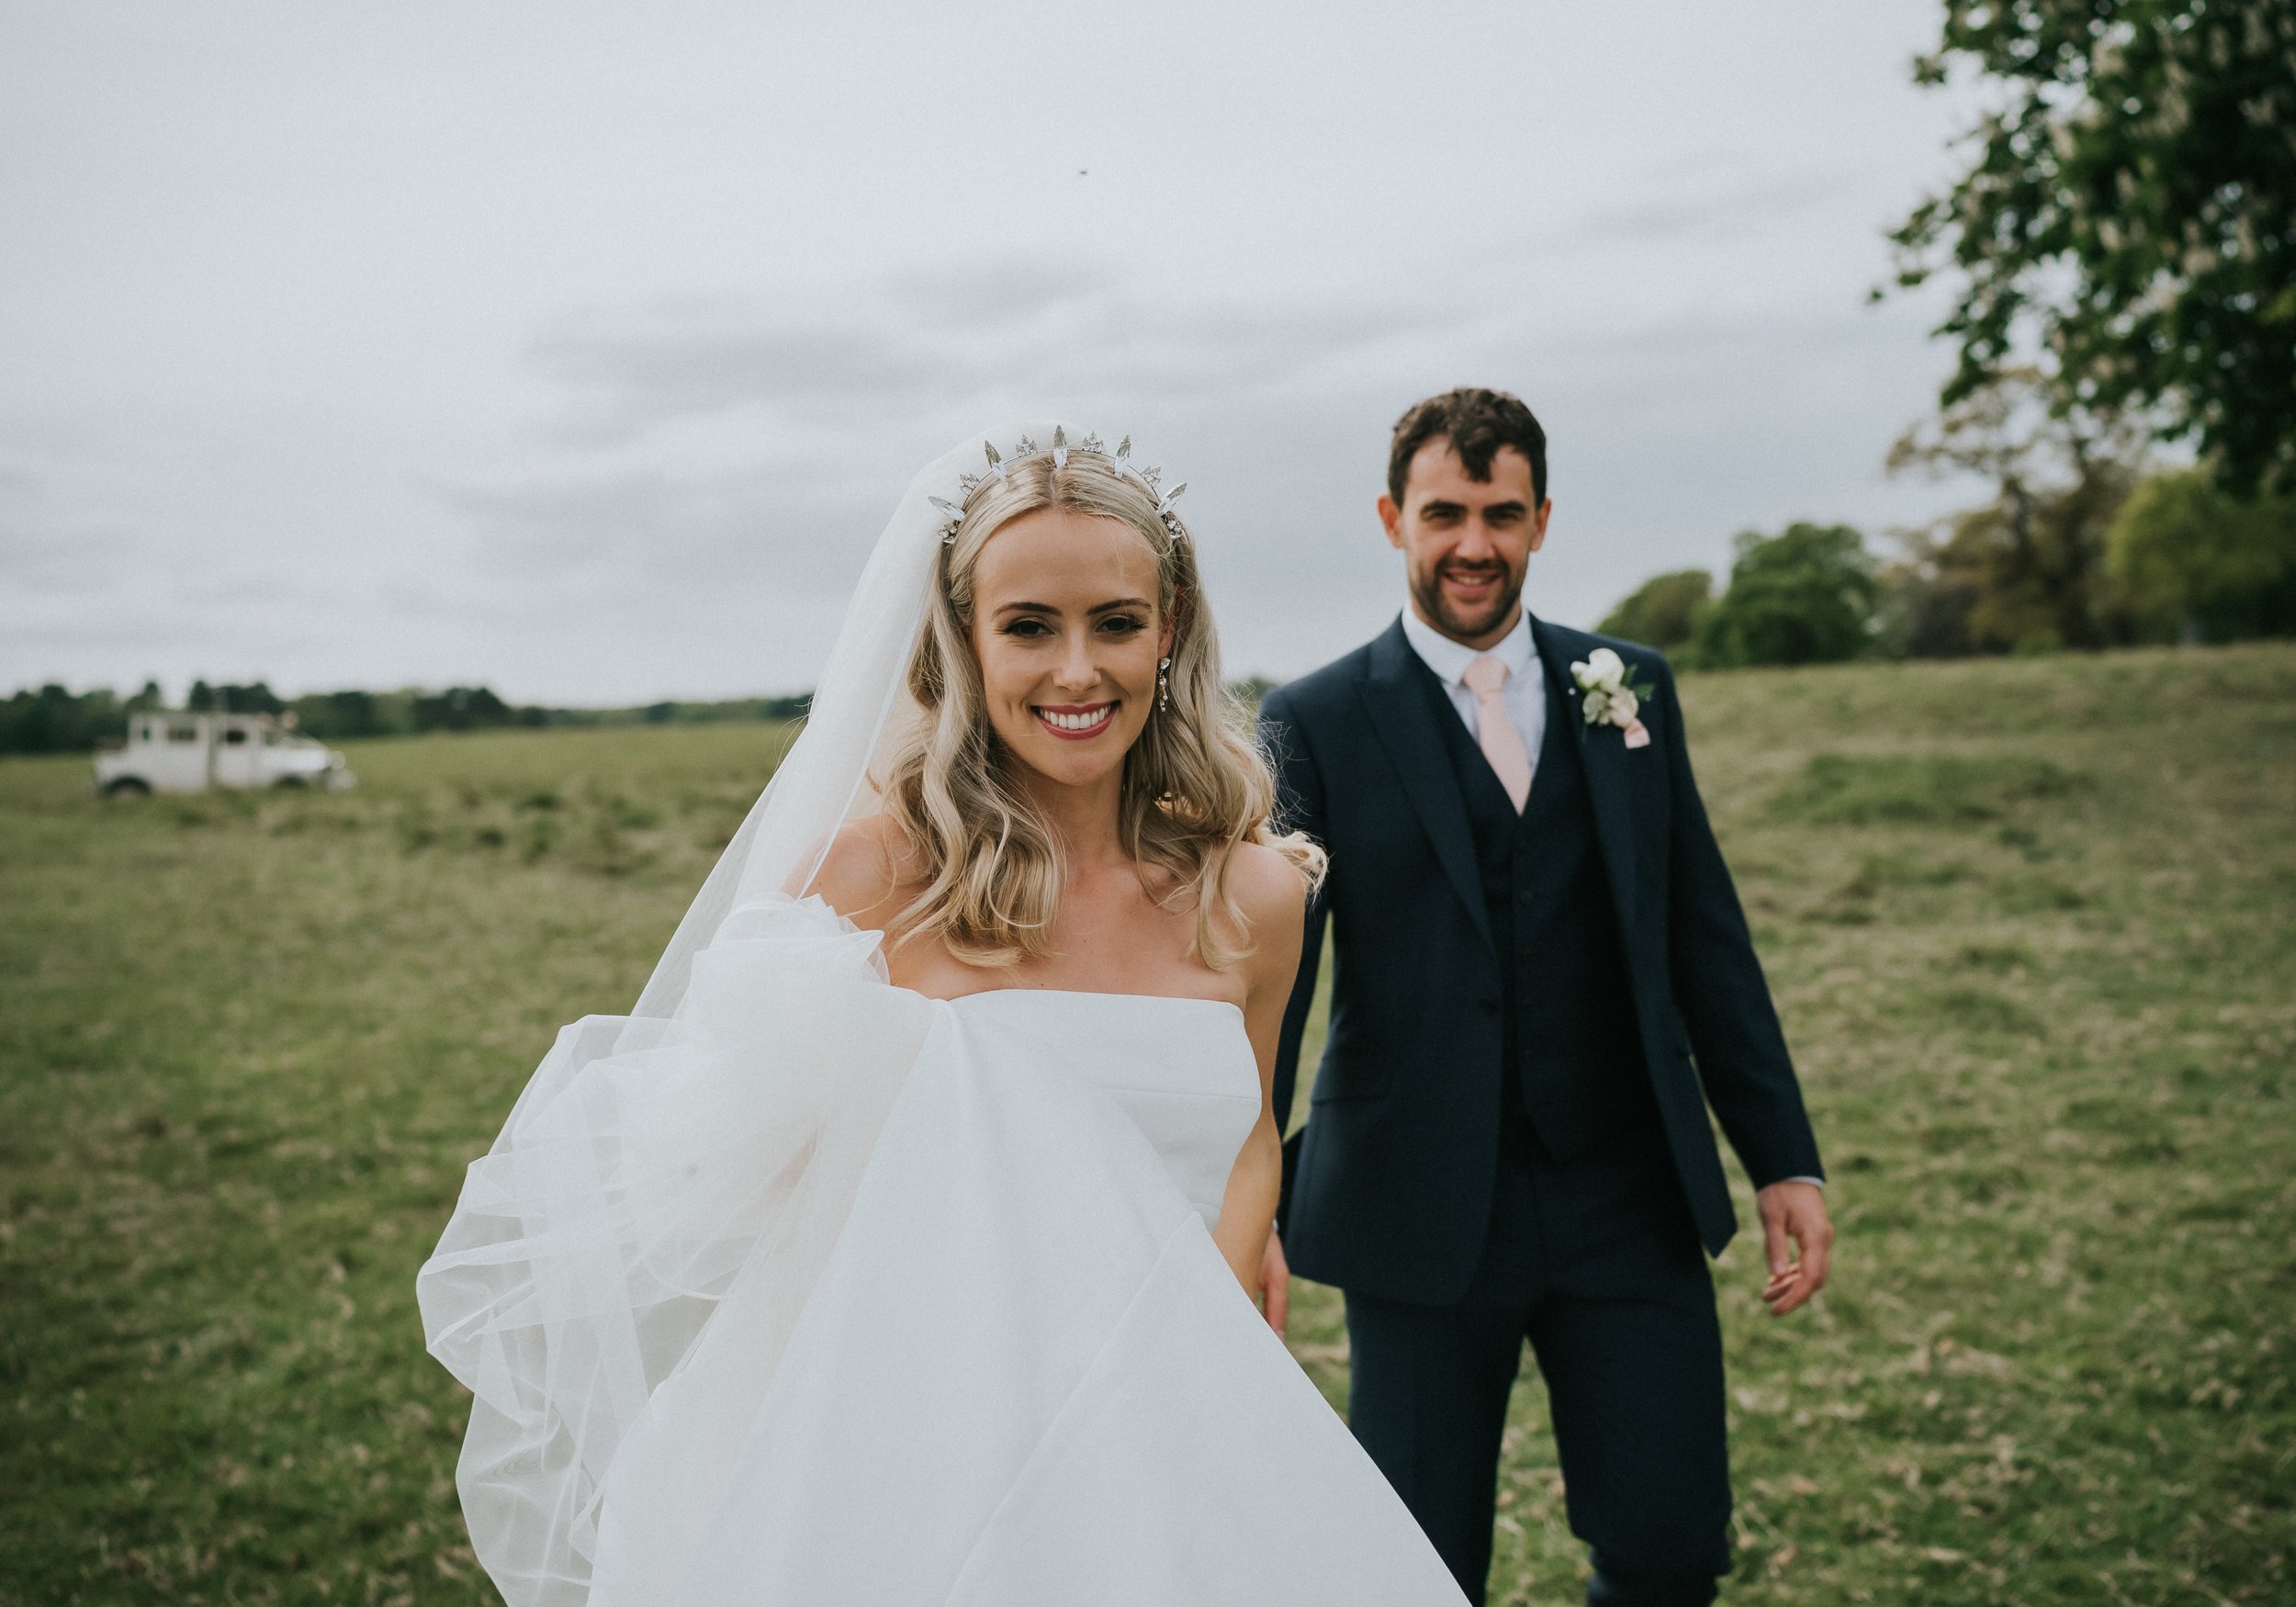 Two stunning dresses and Tilly Thomas Lux jewels for a glamorous wedding day